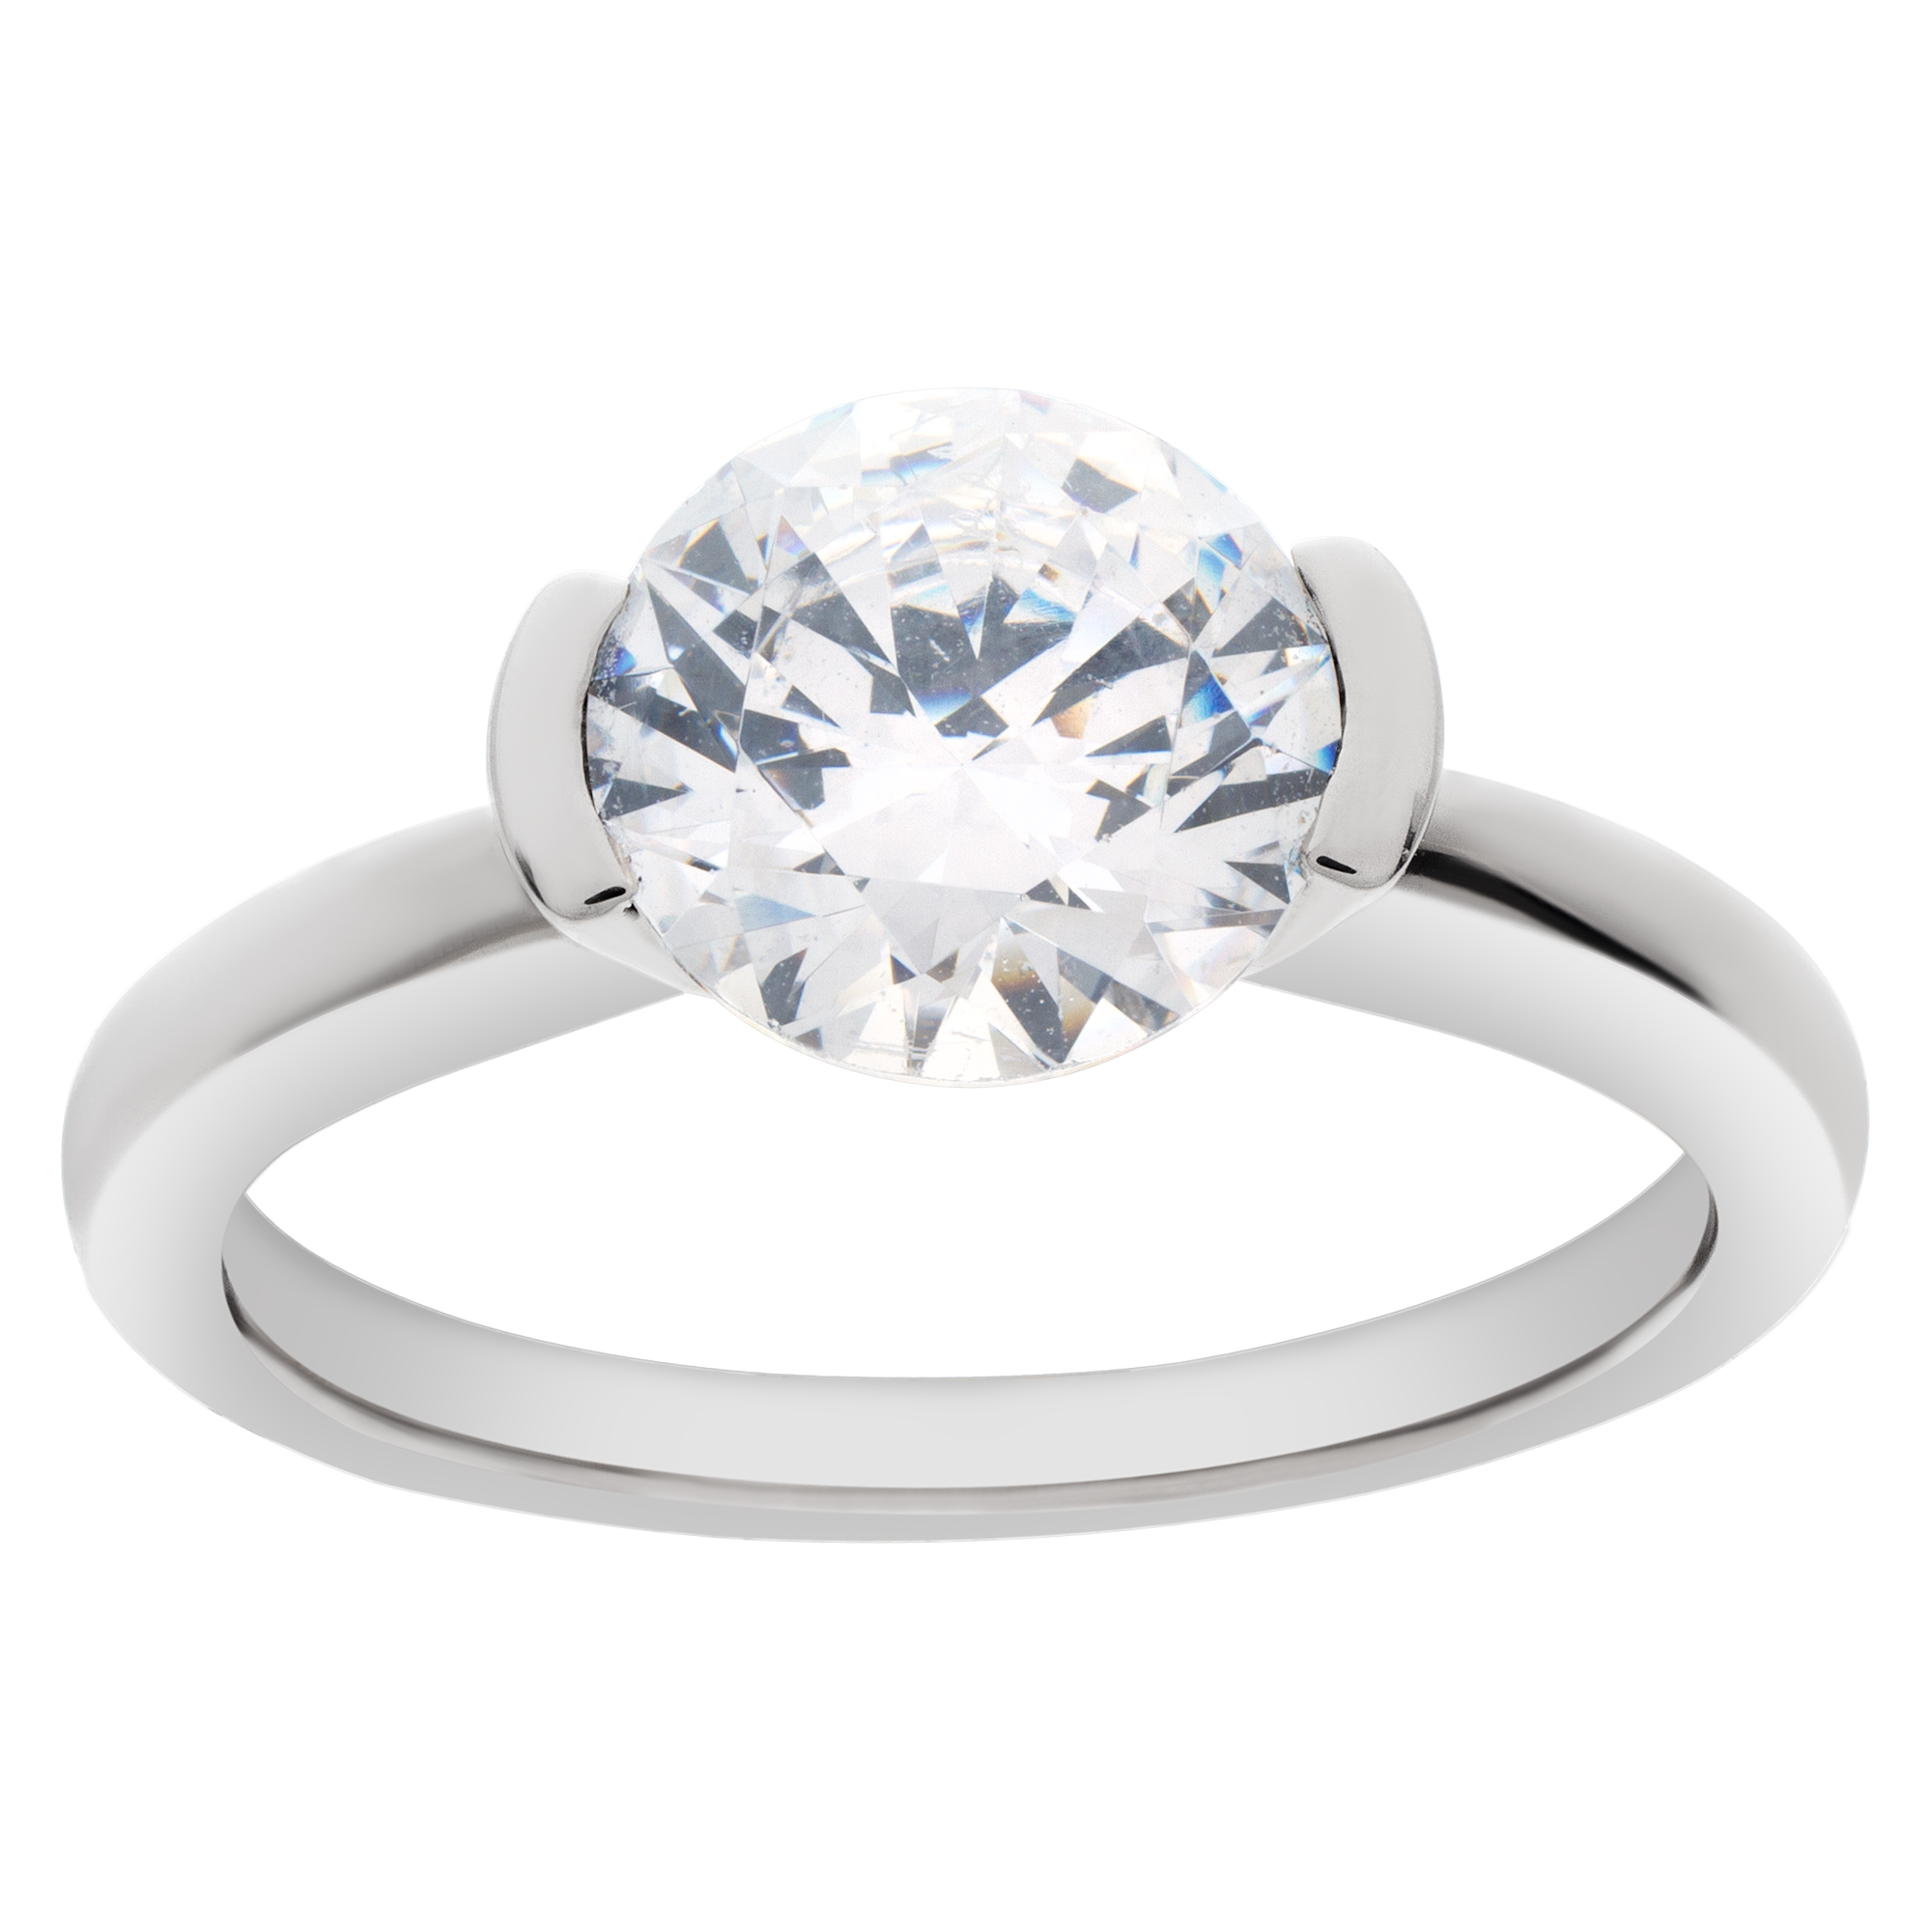 Ritani 18k white gold mounting to hold 2.00ct round center diamond. (Diamond not included) image 1